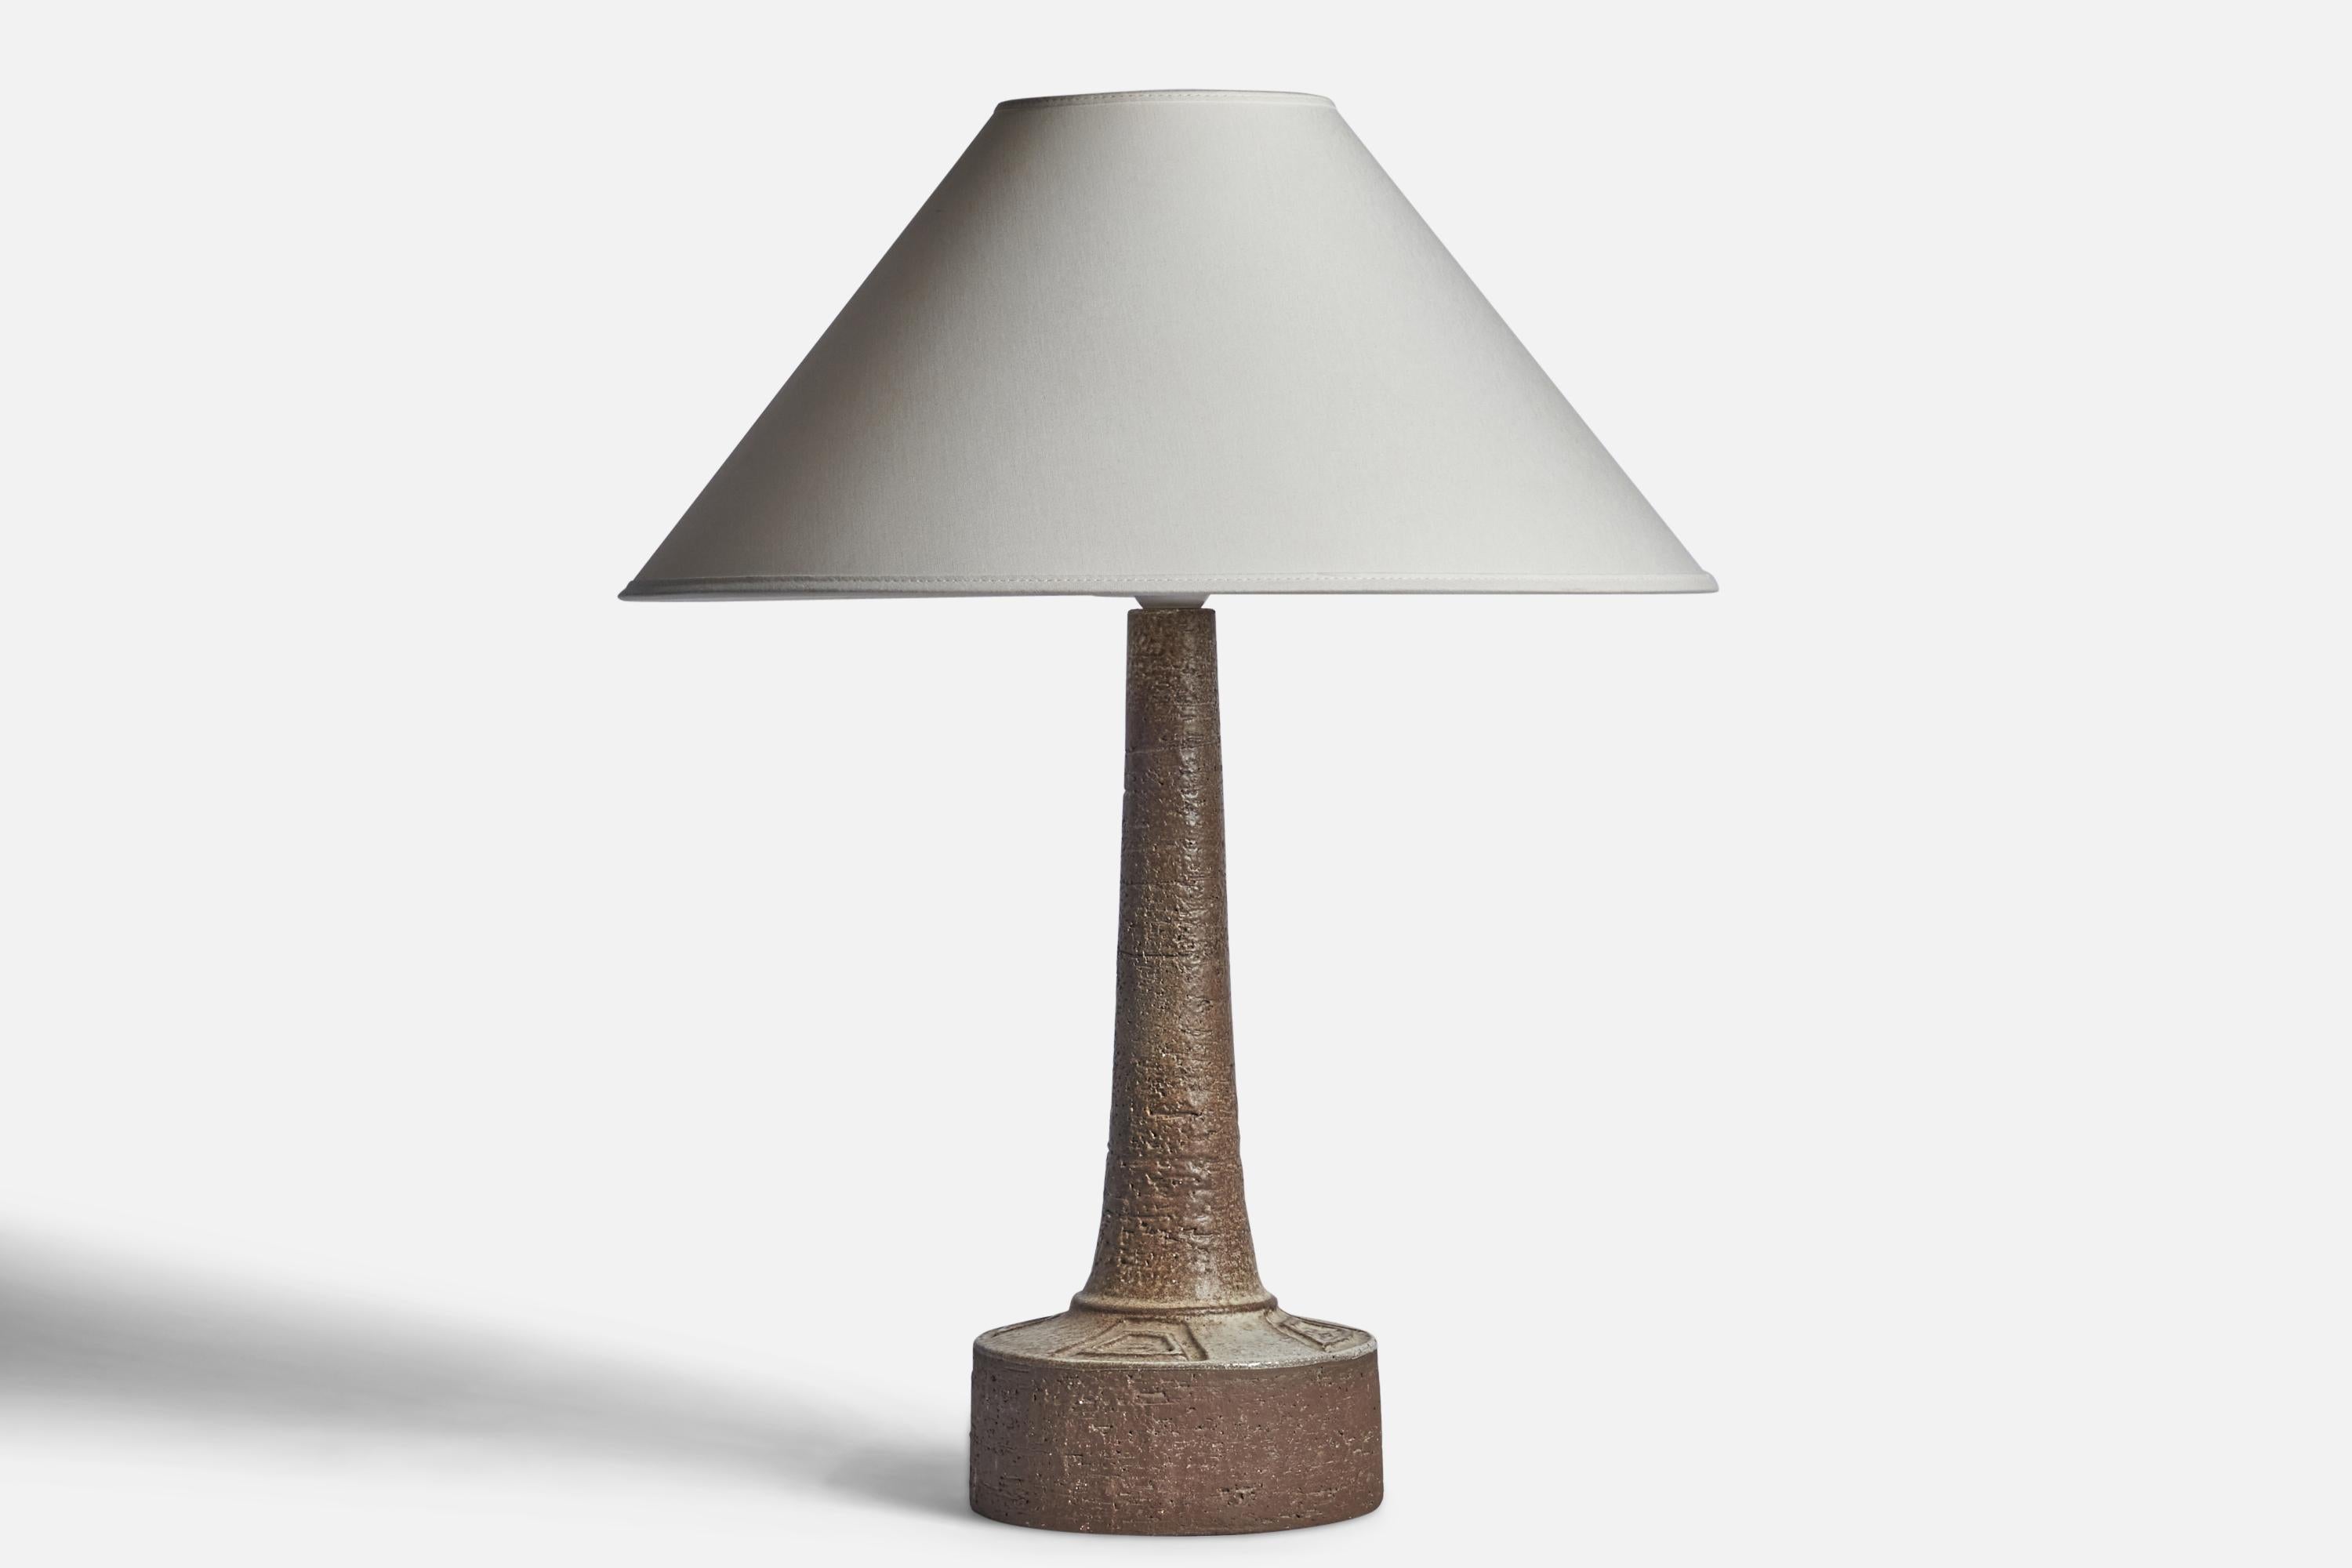 A brown and grey-glazed stoneware table lamp designed and produced by Sejer, Denmark, c. 1960s.

Dimensions of Lamp (inches): 16” H x 6.05” Diameter
Dimensions of Shade (inches): 4.5” Top Diameter x 16” Bottom Diameter x 7.25” H
Dimensions of Lamp